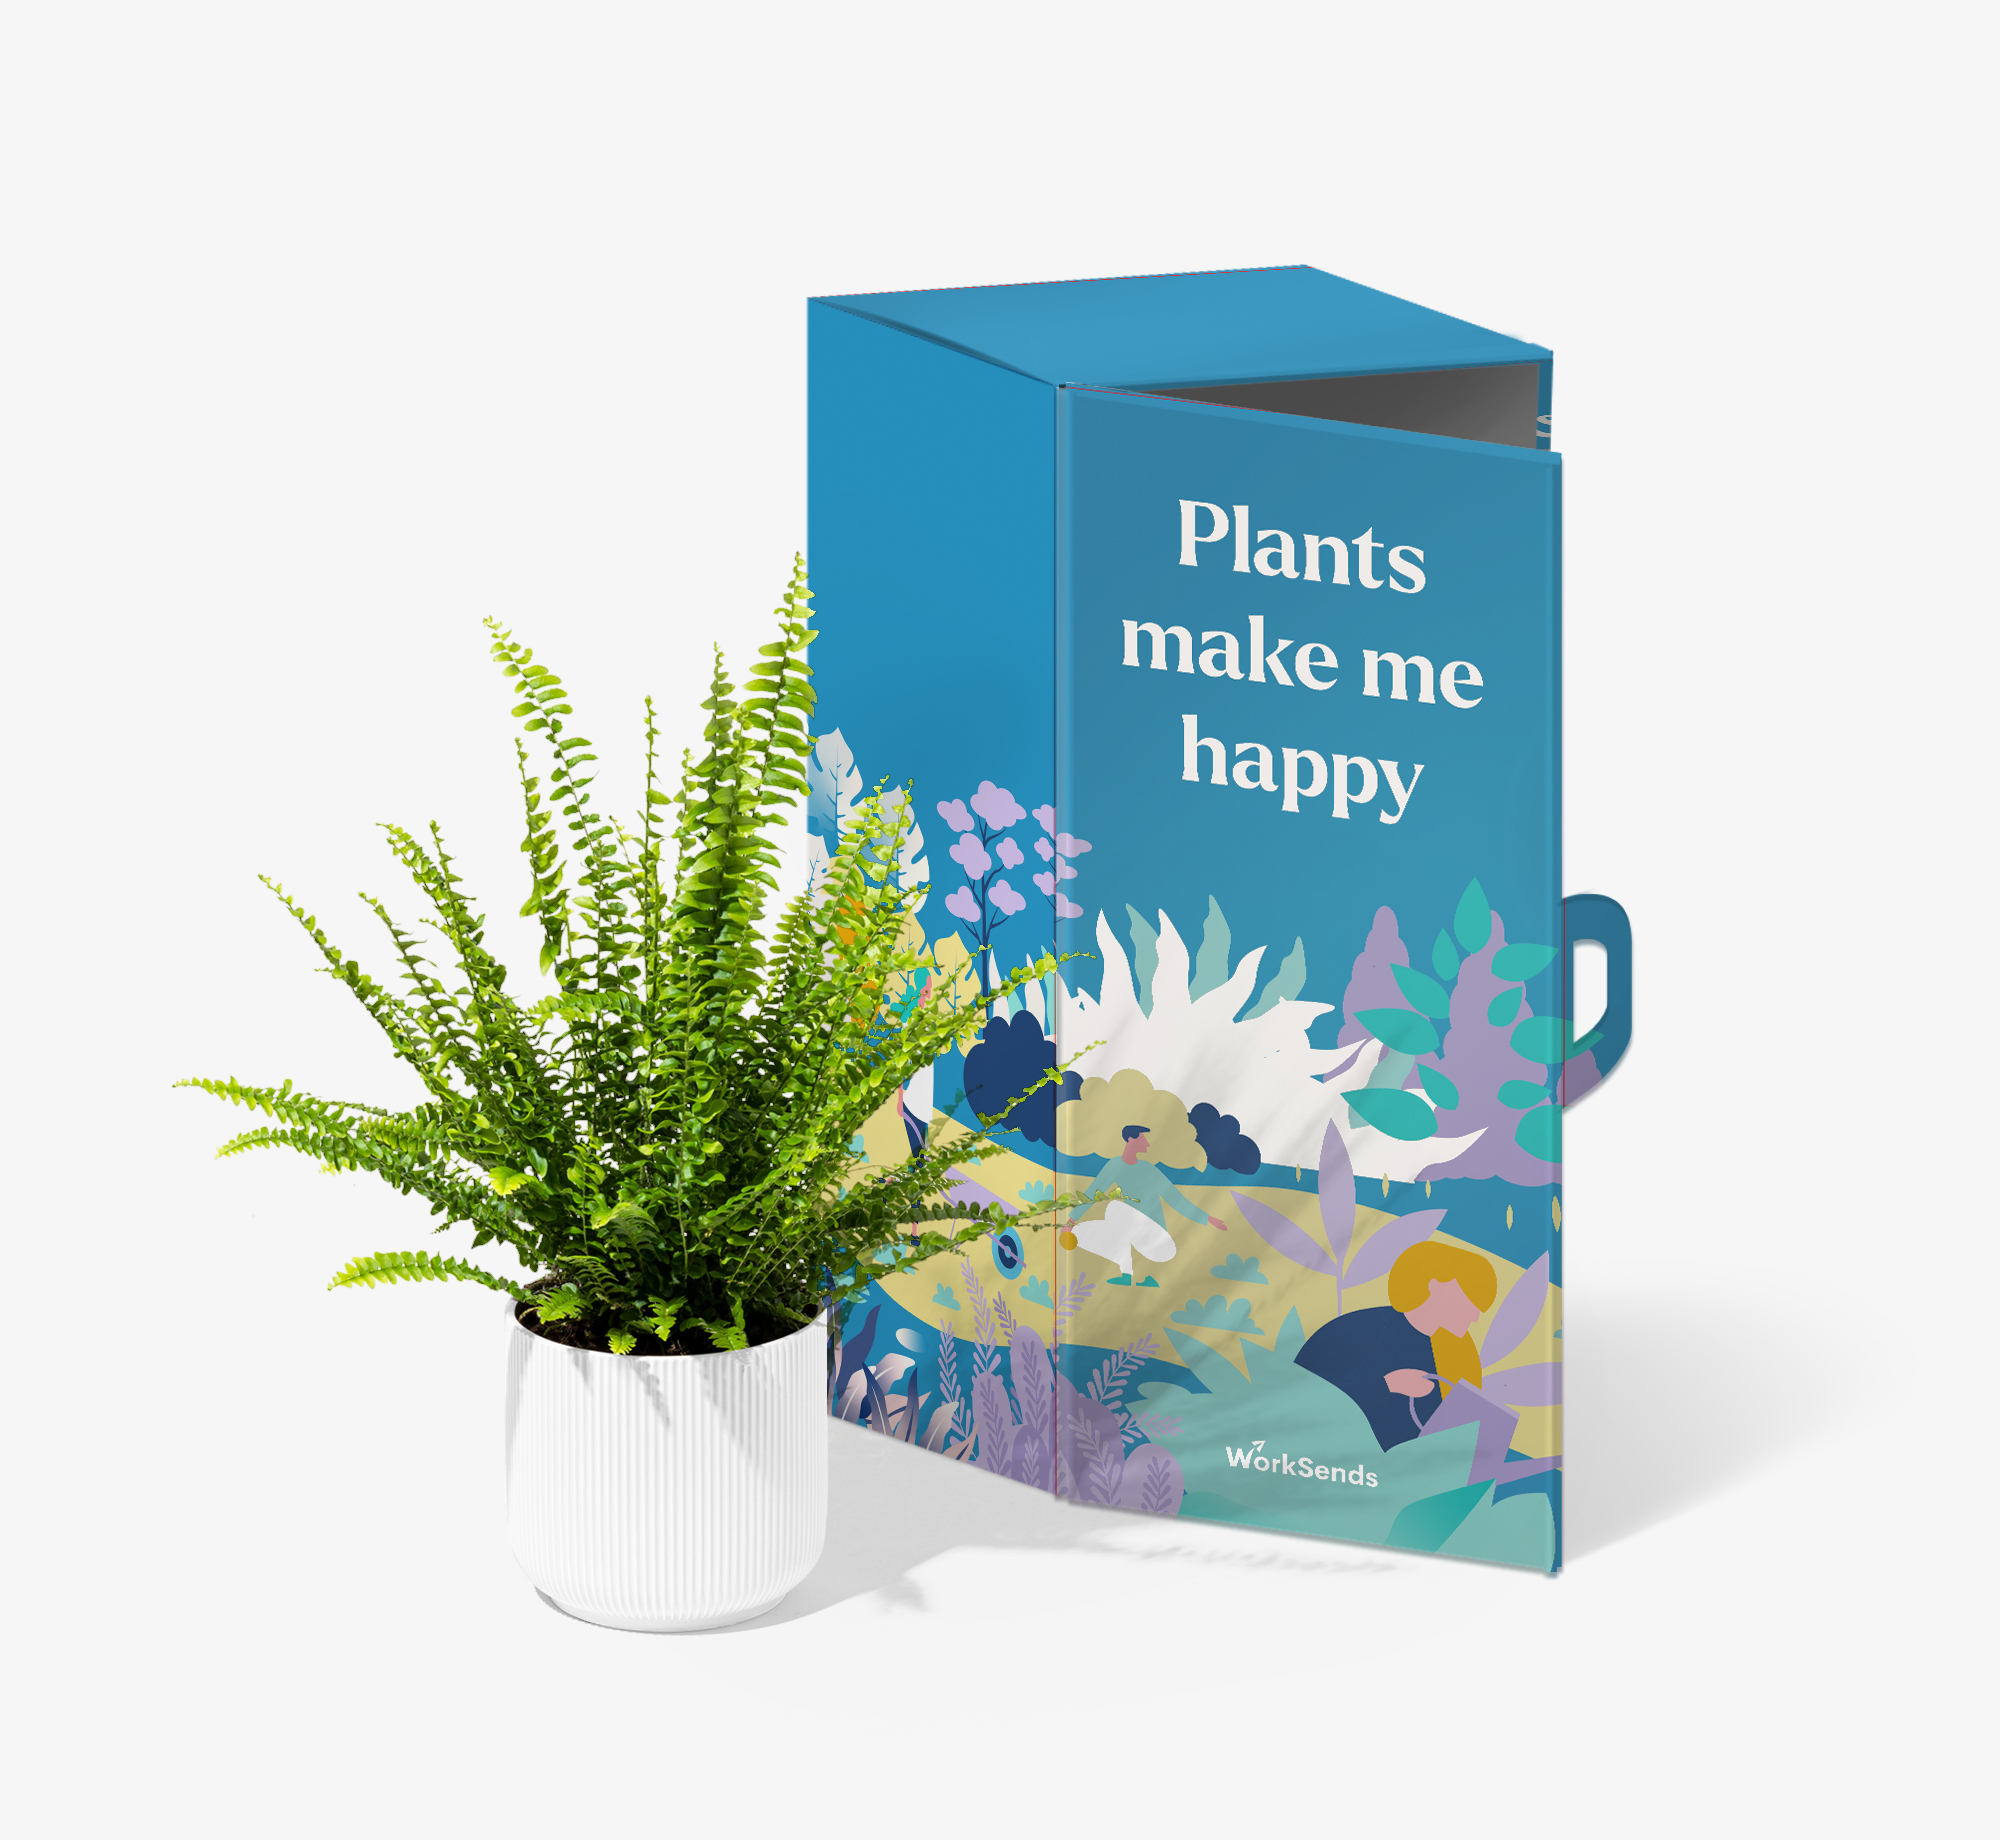 Boston Fern Plant by Order – April 24, 2022 @ 09:38 PMCorporate Gifts| Bookblock